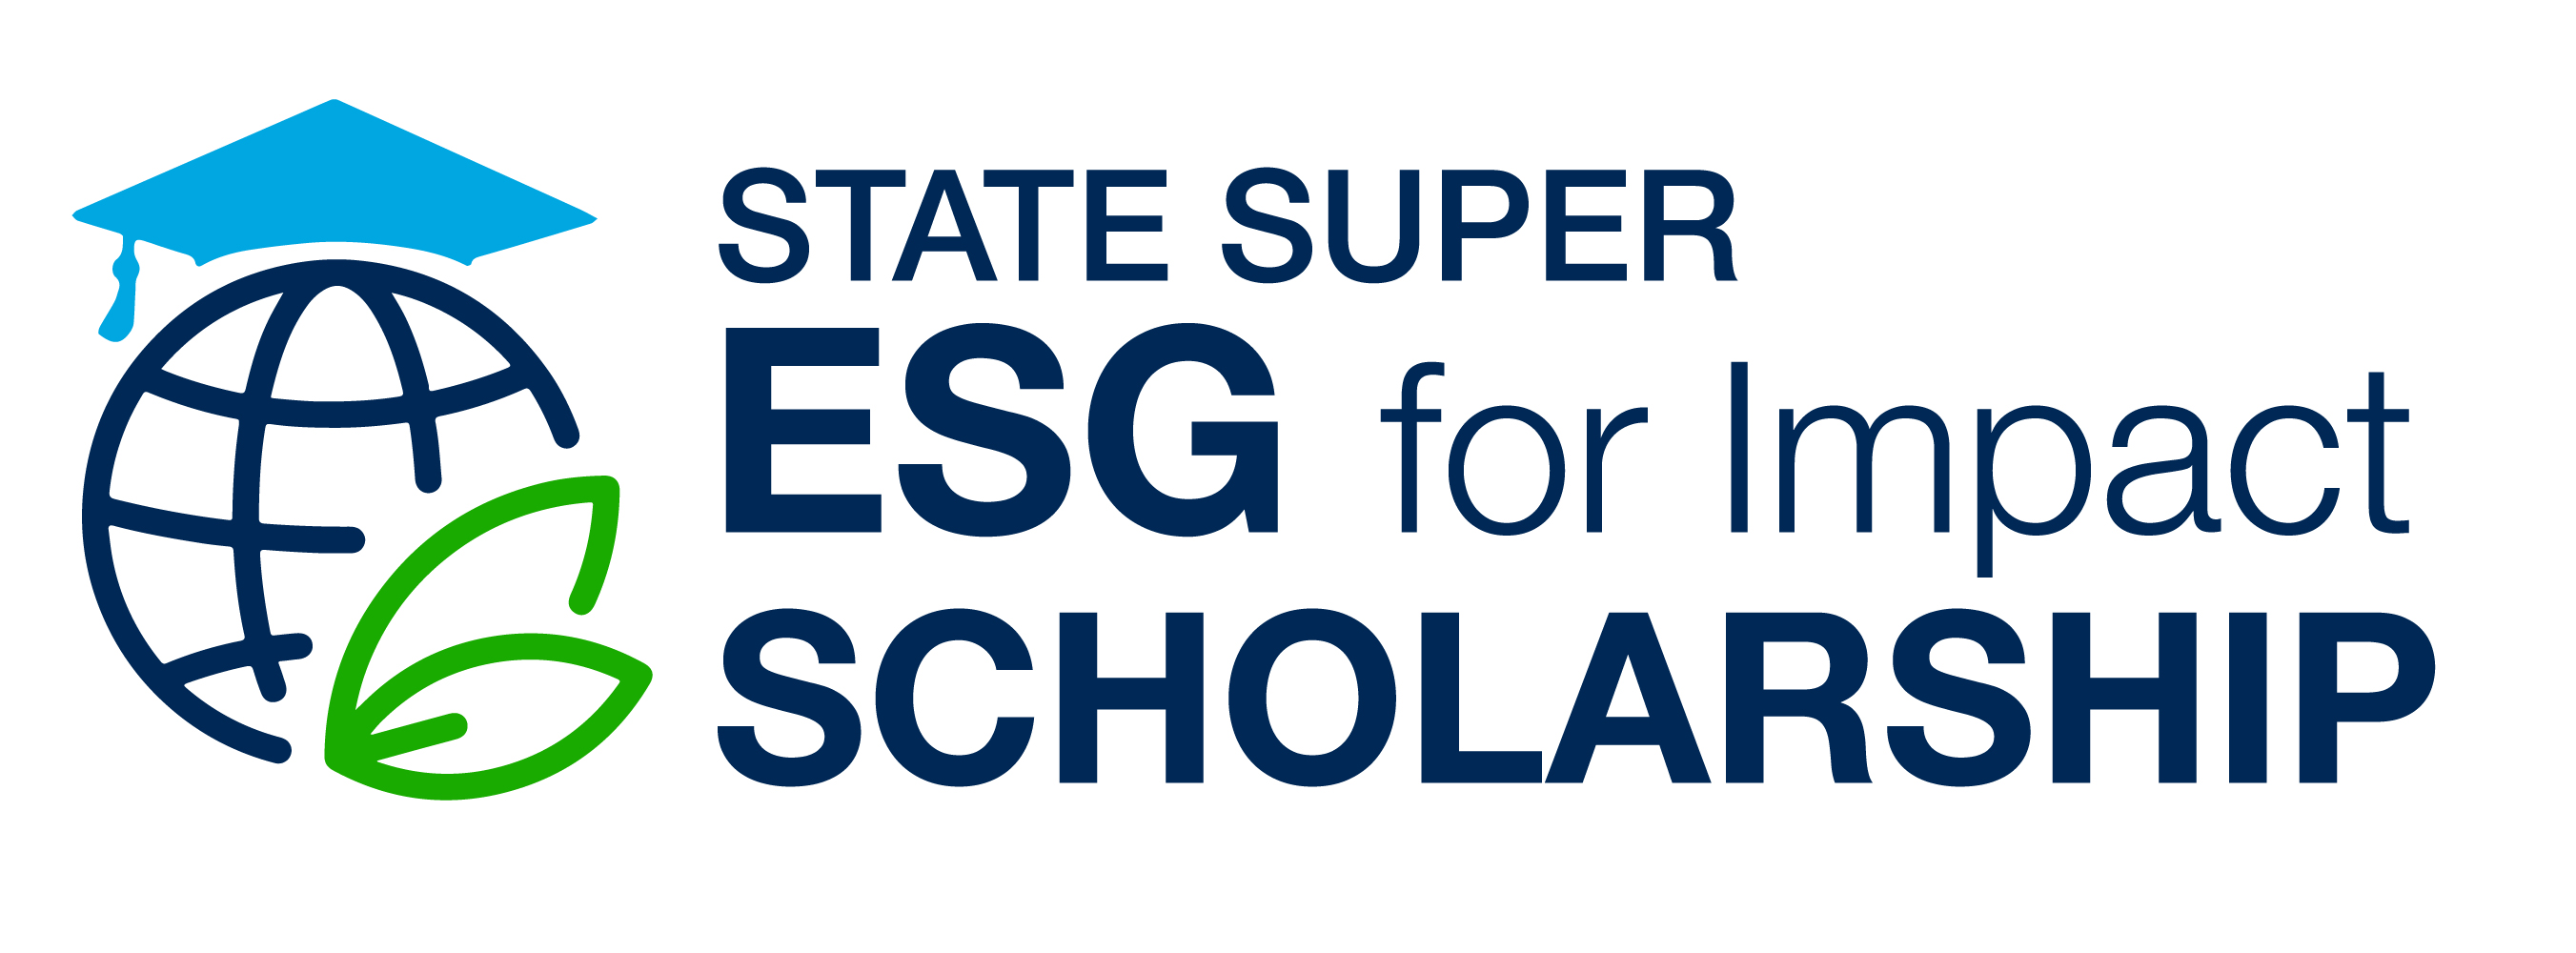 State Super launches new ESG for Impact Scholarship - State Super ESG logo